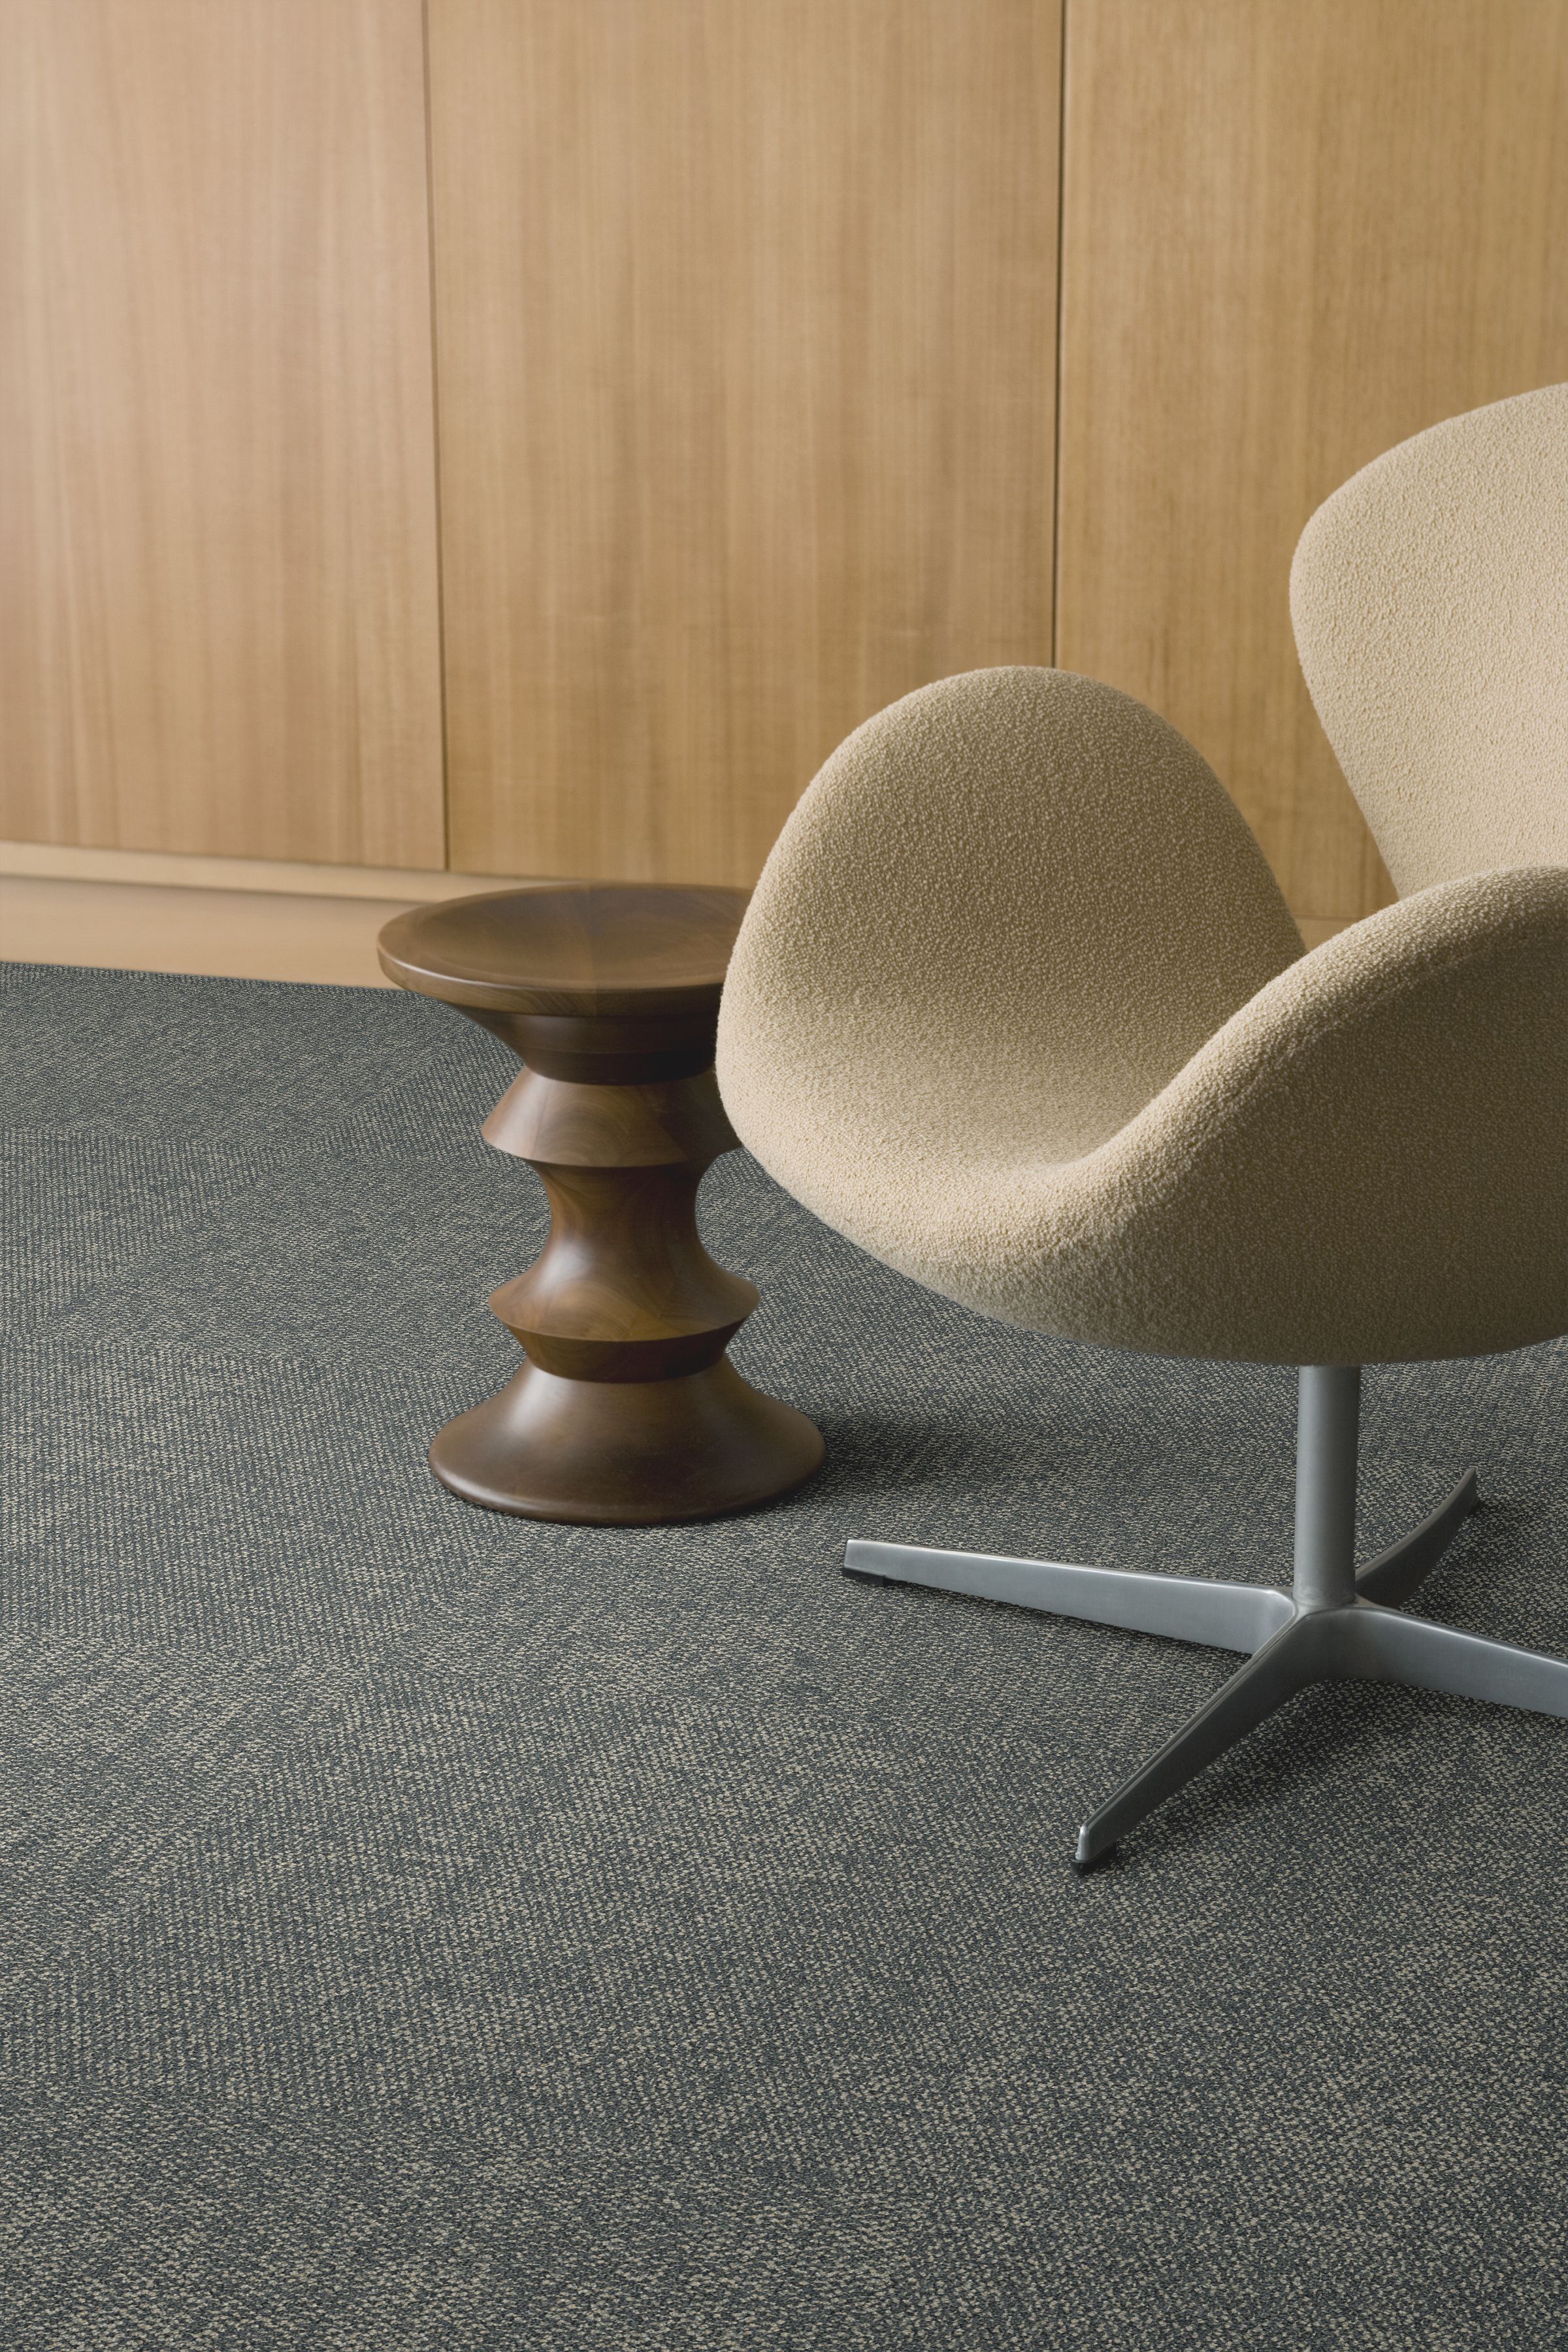 Detail of Interface Lighthearted carpet tile with chair and Eames stool imagen número 2